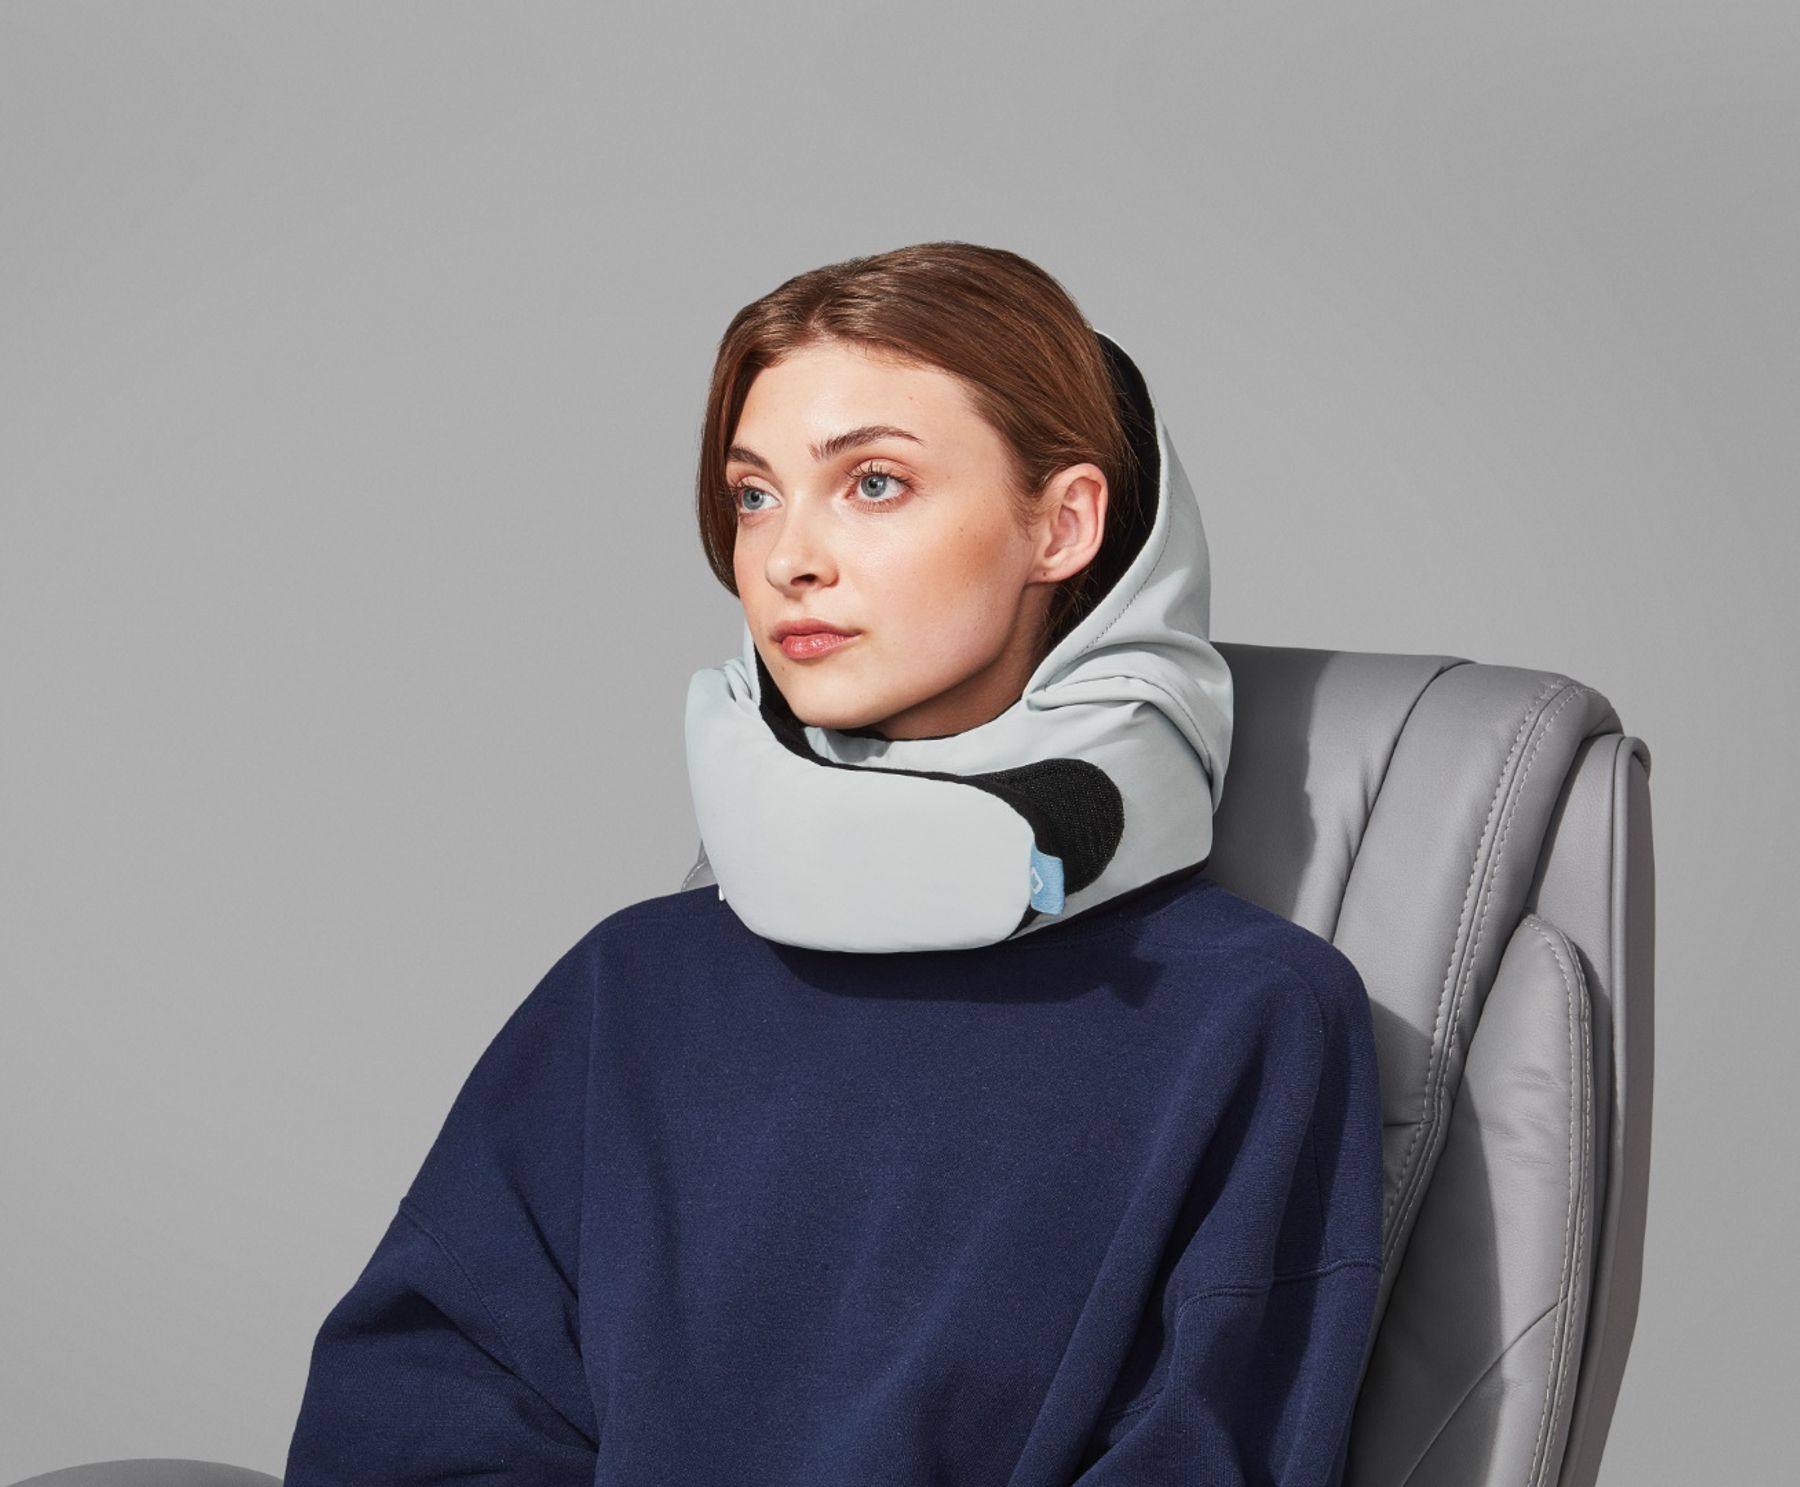 7 Best Travel Pillows of 2023 - Neck Pillows for Travel